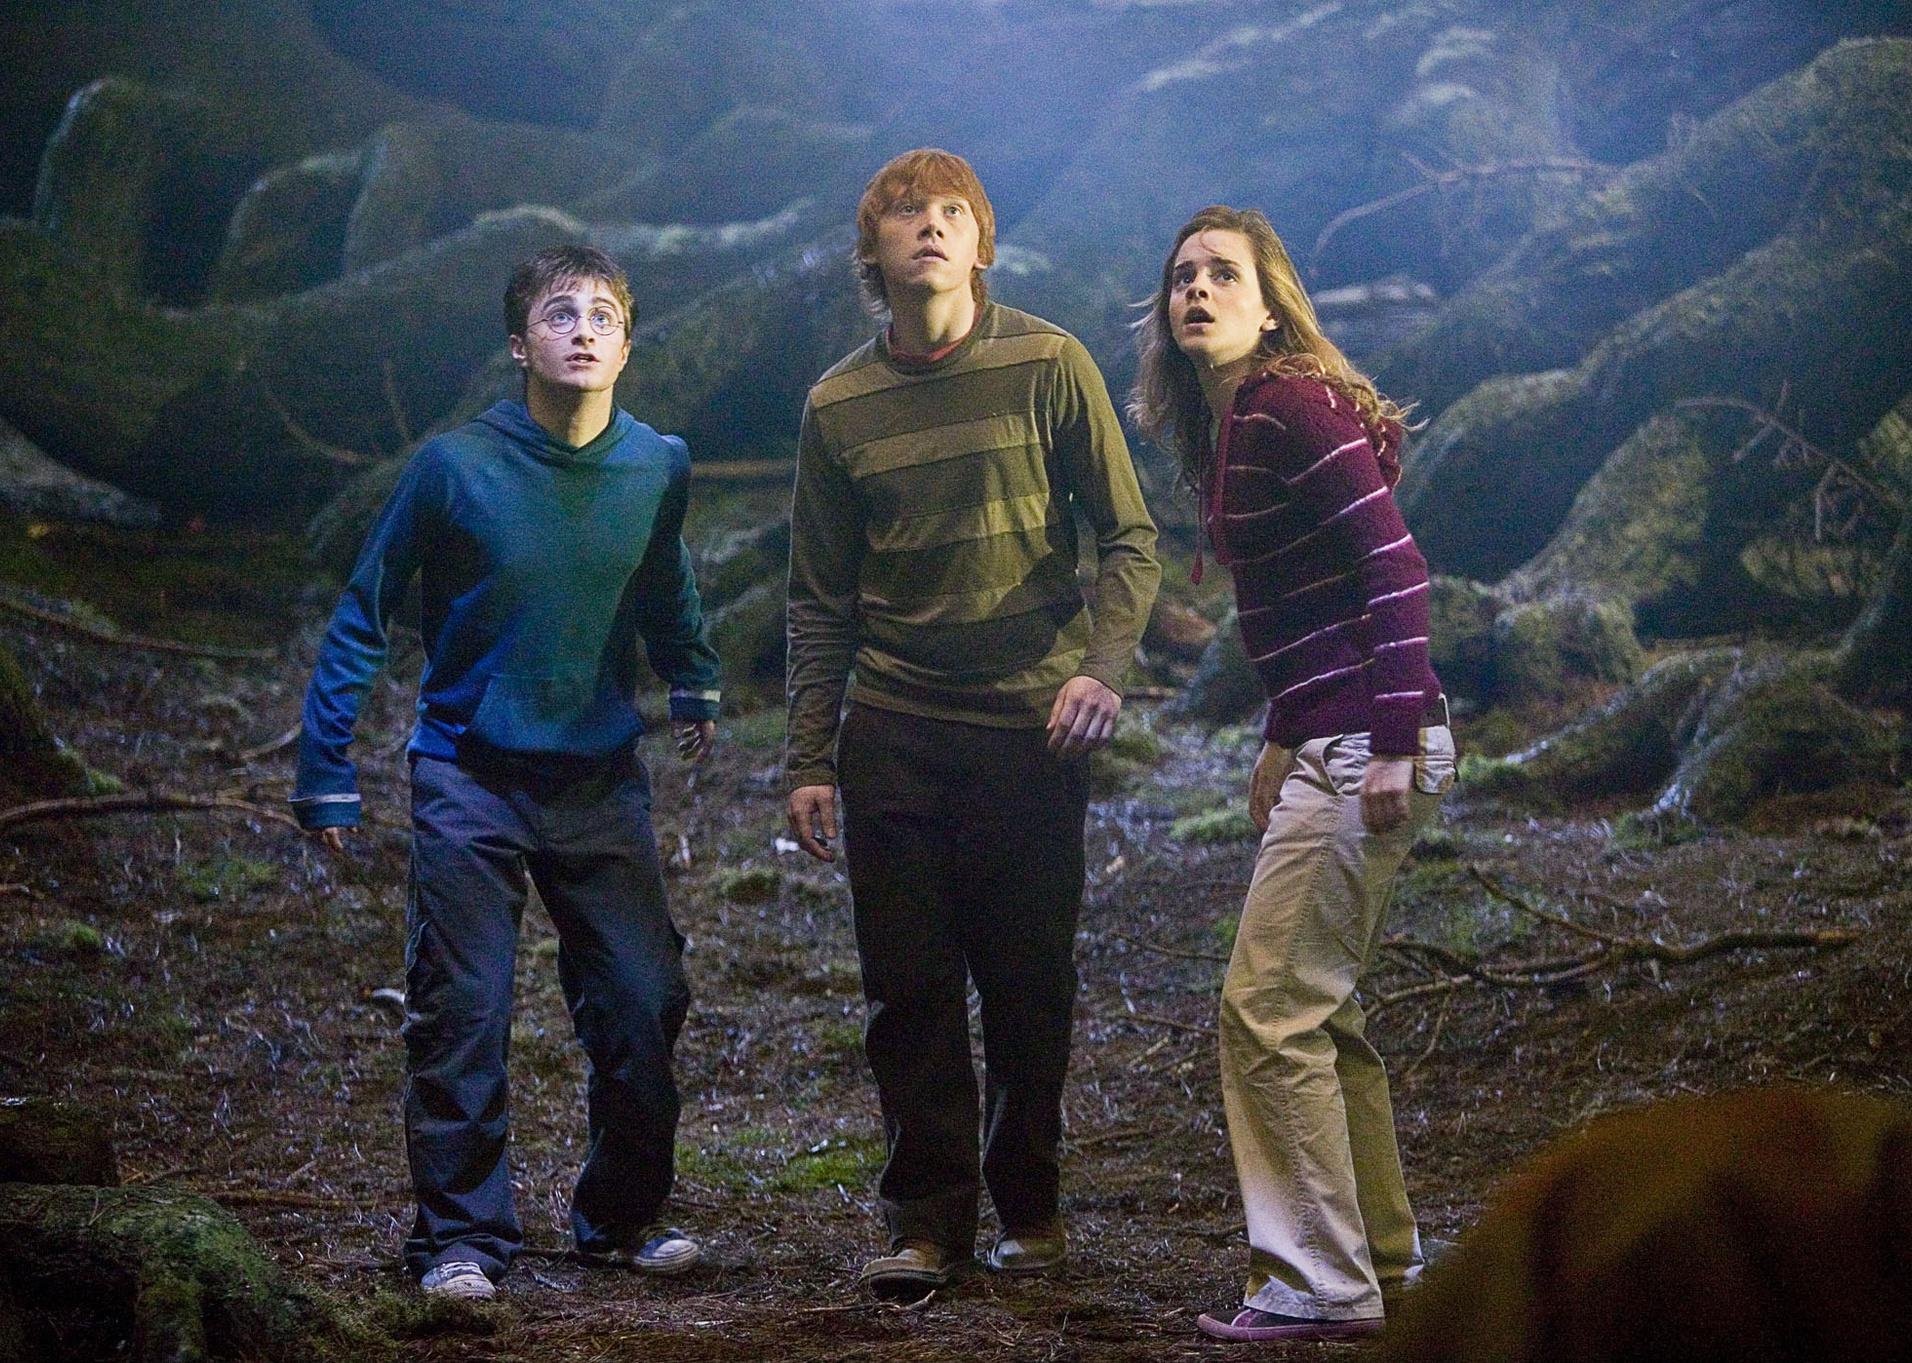 Rupert Grint, Daniel Radcliffe, and Emma Watson in a dark forest looking up at something.